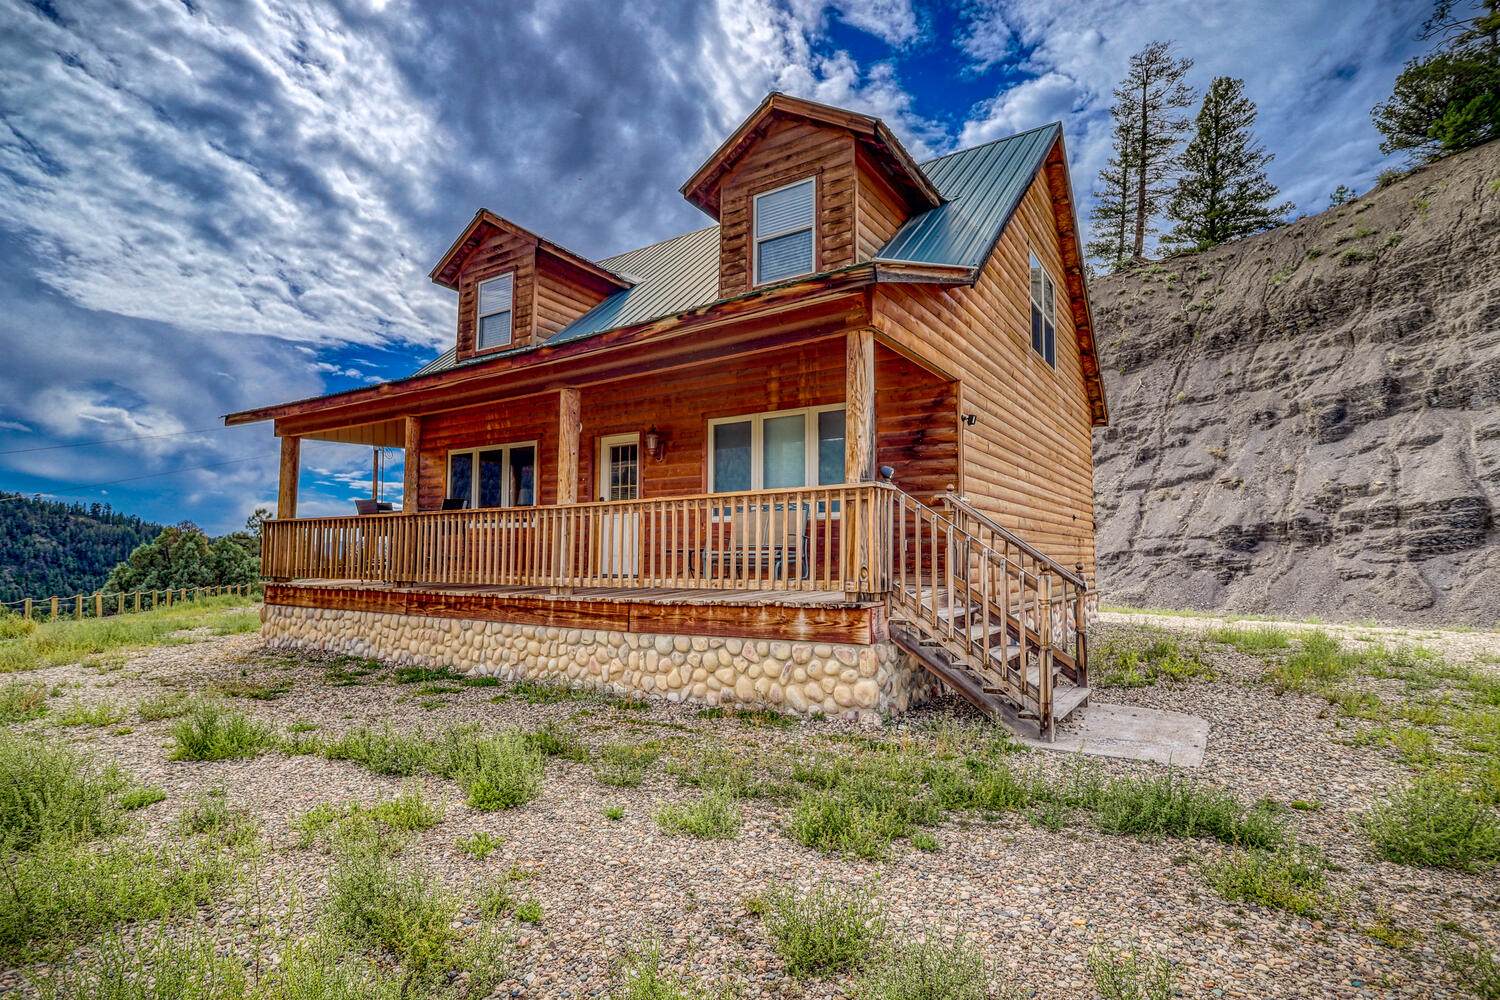 Hilltop Cabin, #14317 W Hwy 160 - St, Pagosa Springs, CO 81147